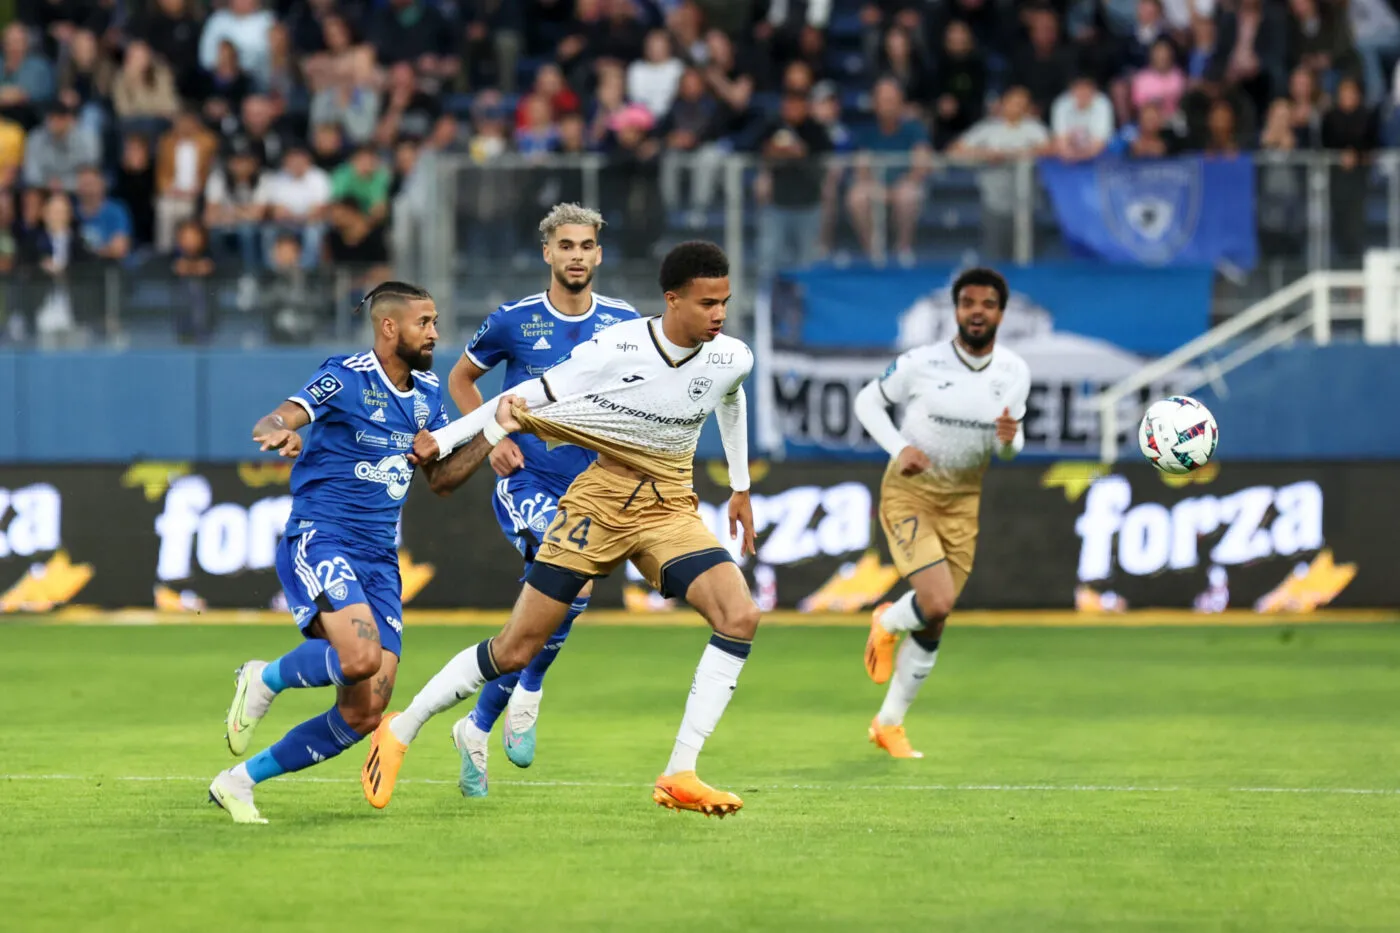 23 Lloyd PALUN (scb) - 24 Michael Amir RICHARDSON (hac) during the Ligue 2 BKT match between Bastia and Le Havre at Stade Armand Cesari on May 26, 2023 in Bastia, France. (Photo by Johnny Fidelin/FEP/Icon Sport)